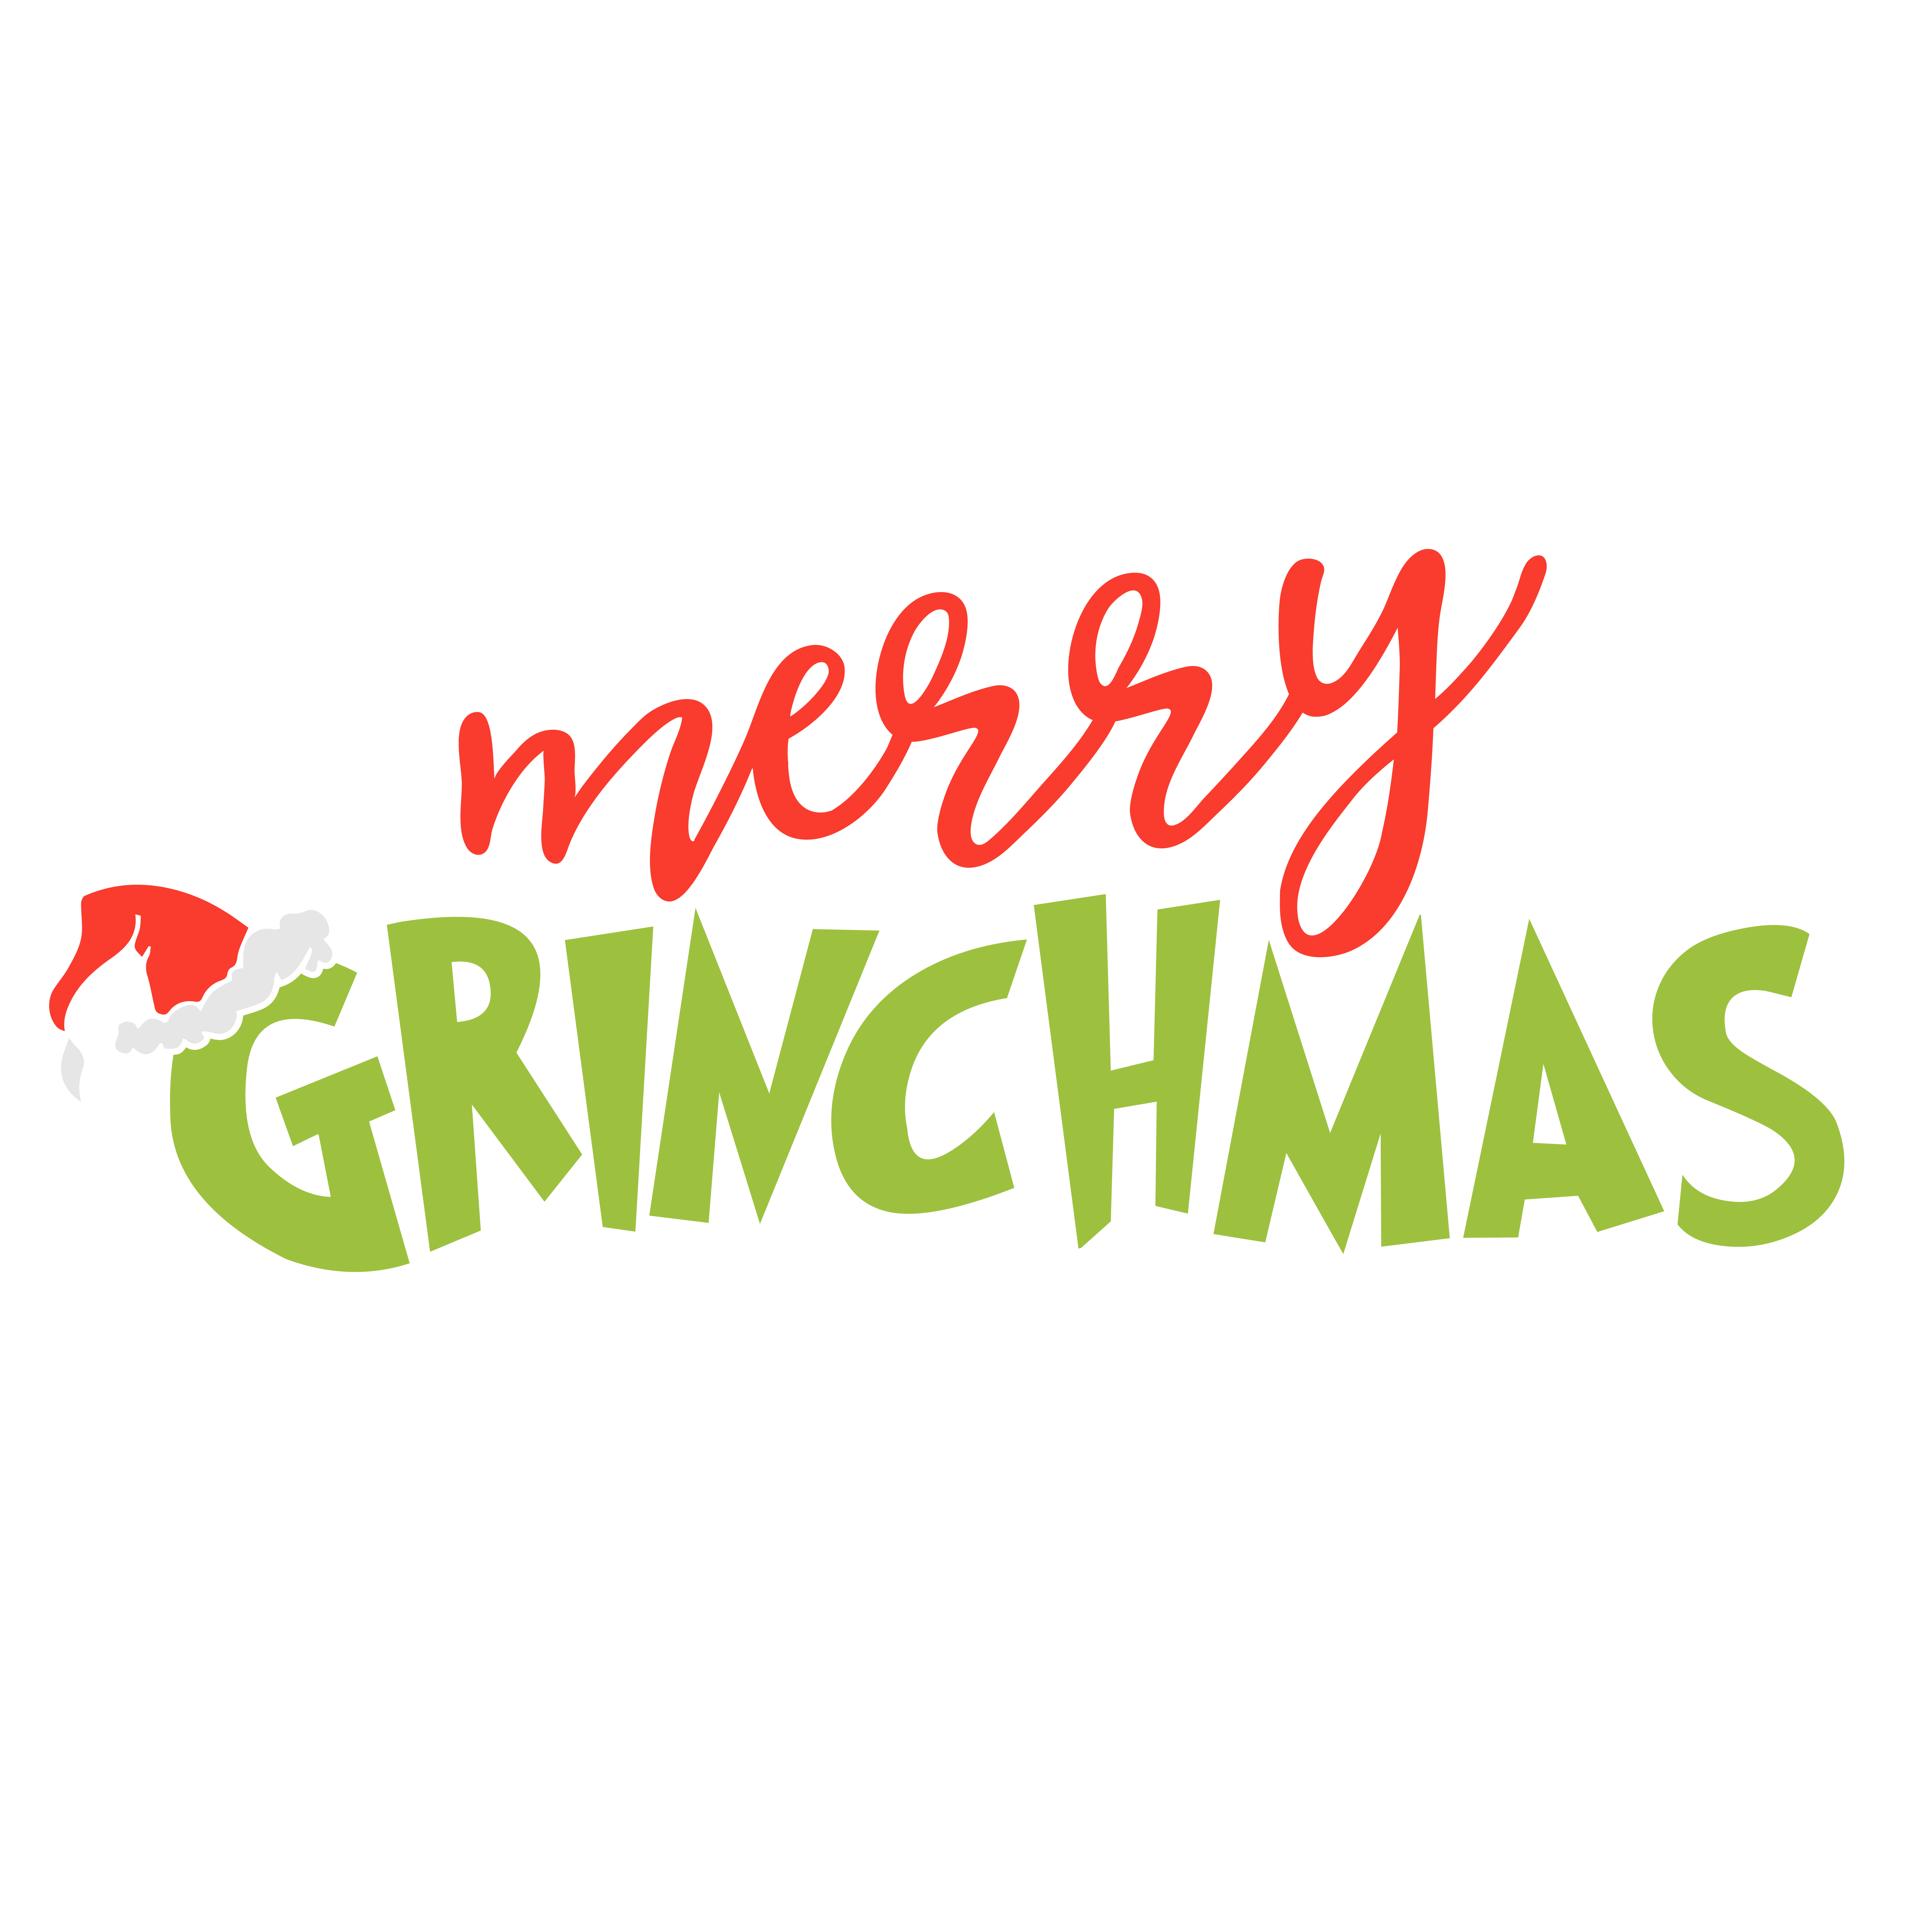 merry grinchmas - Awesome with Sprinkles